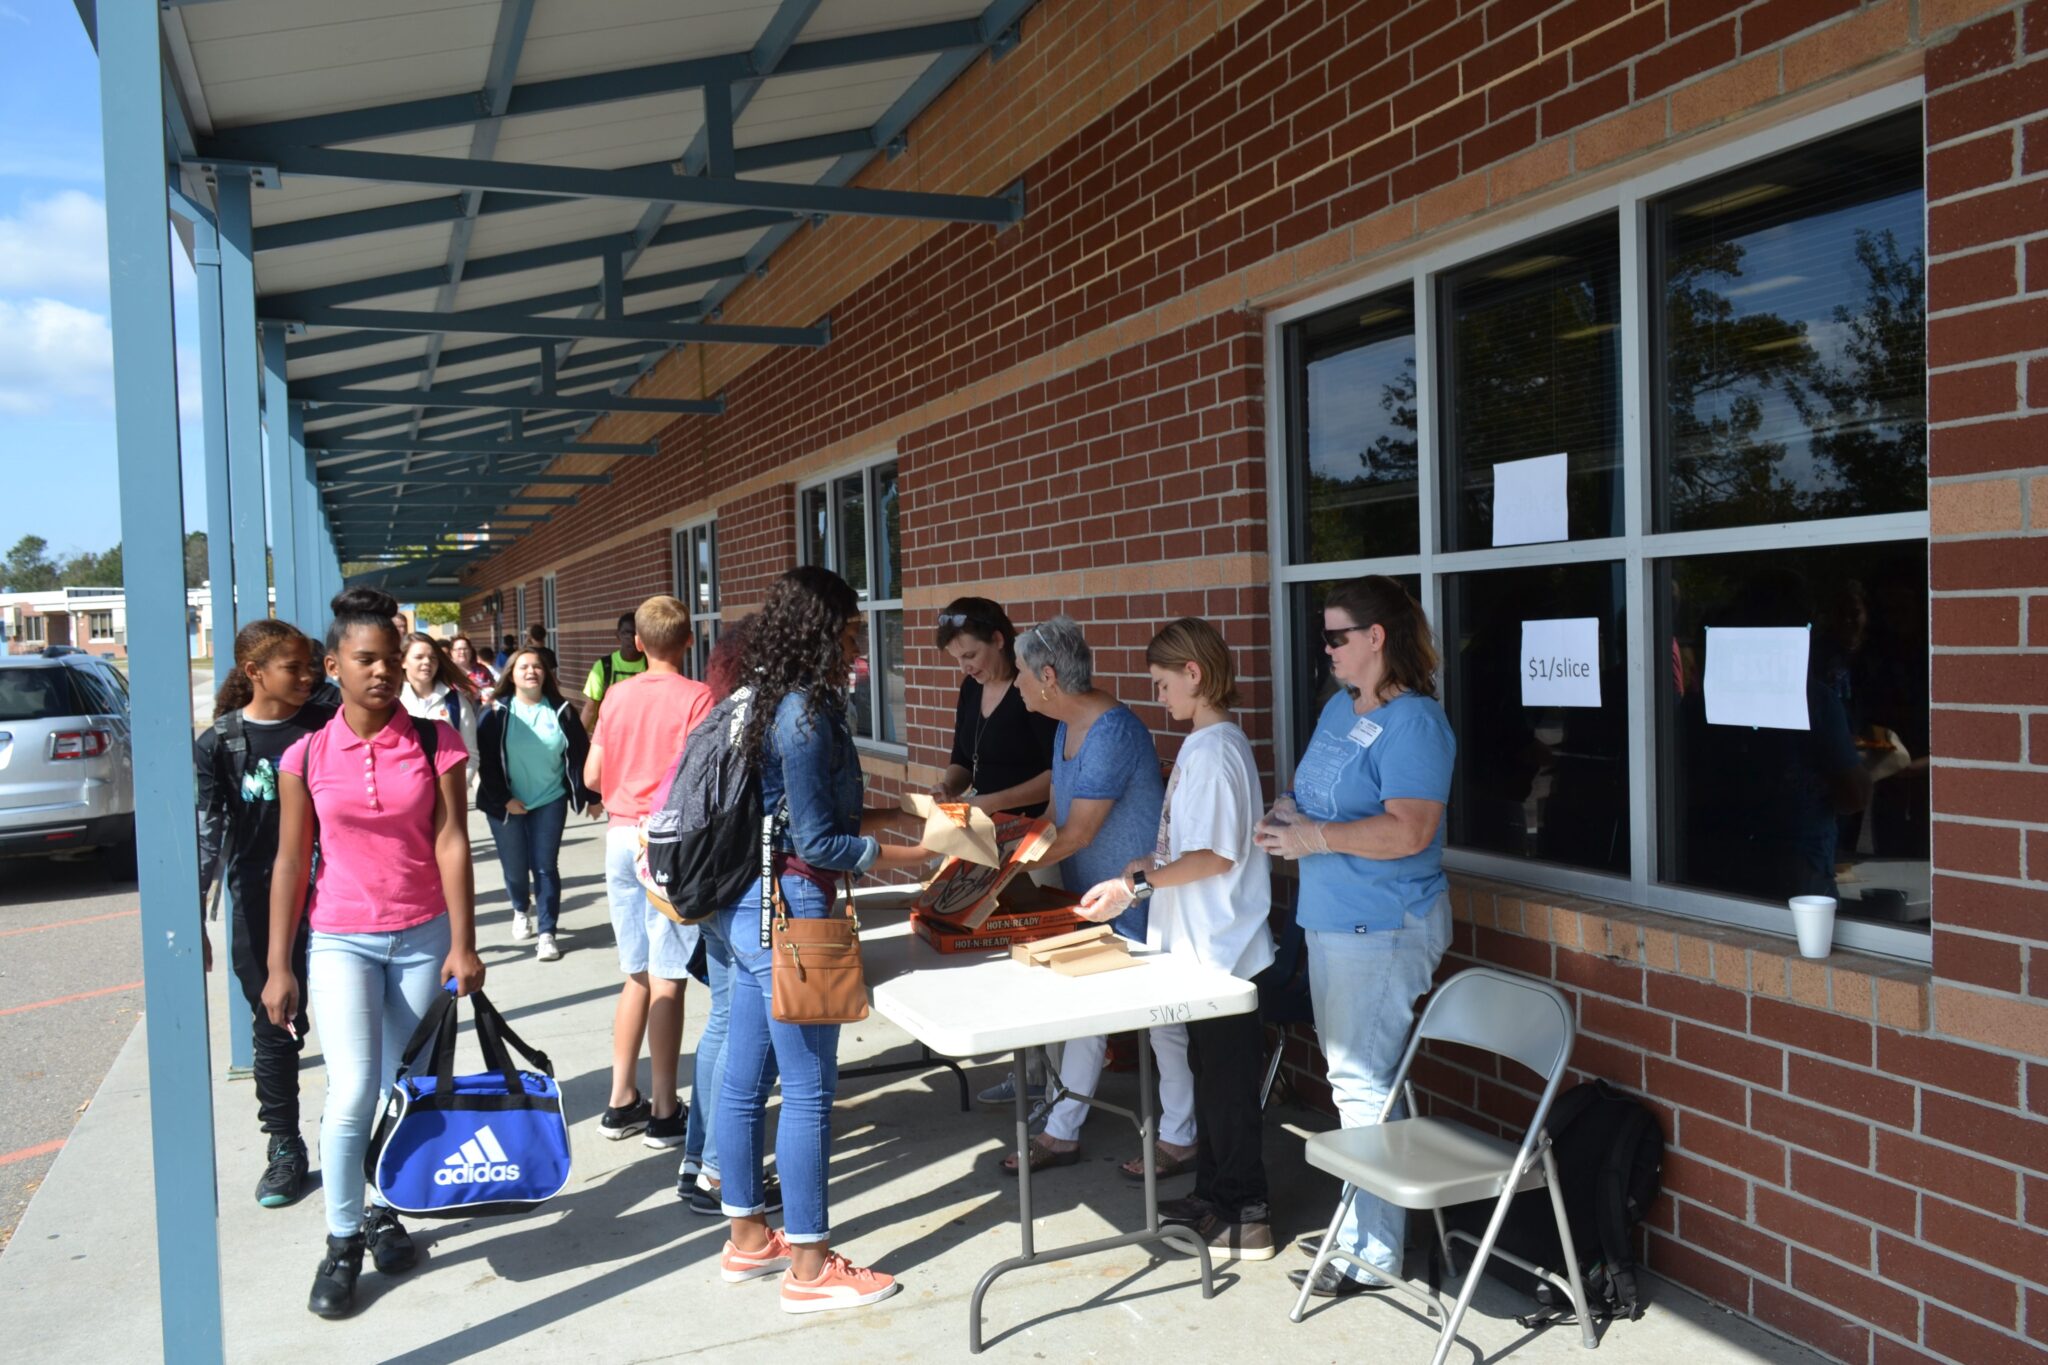 Pictured: Students hold pizza fundraiser for Nathan. The event was sponsored by Little Caesar's. (Provided)